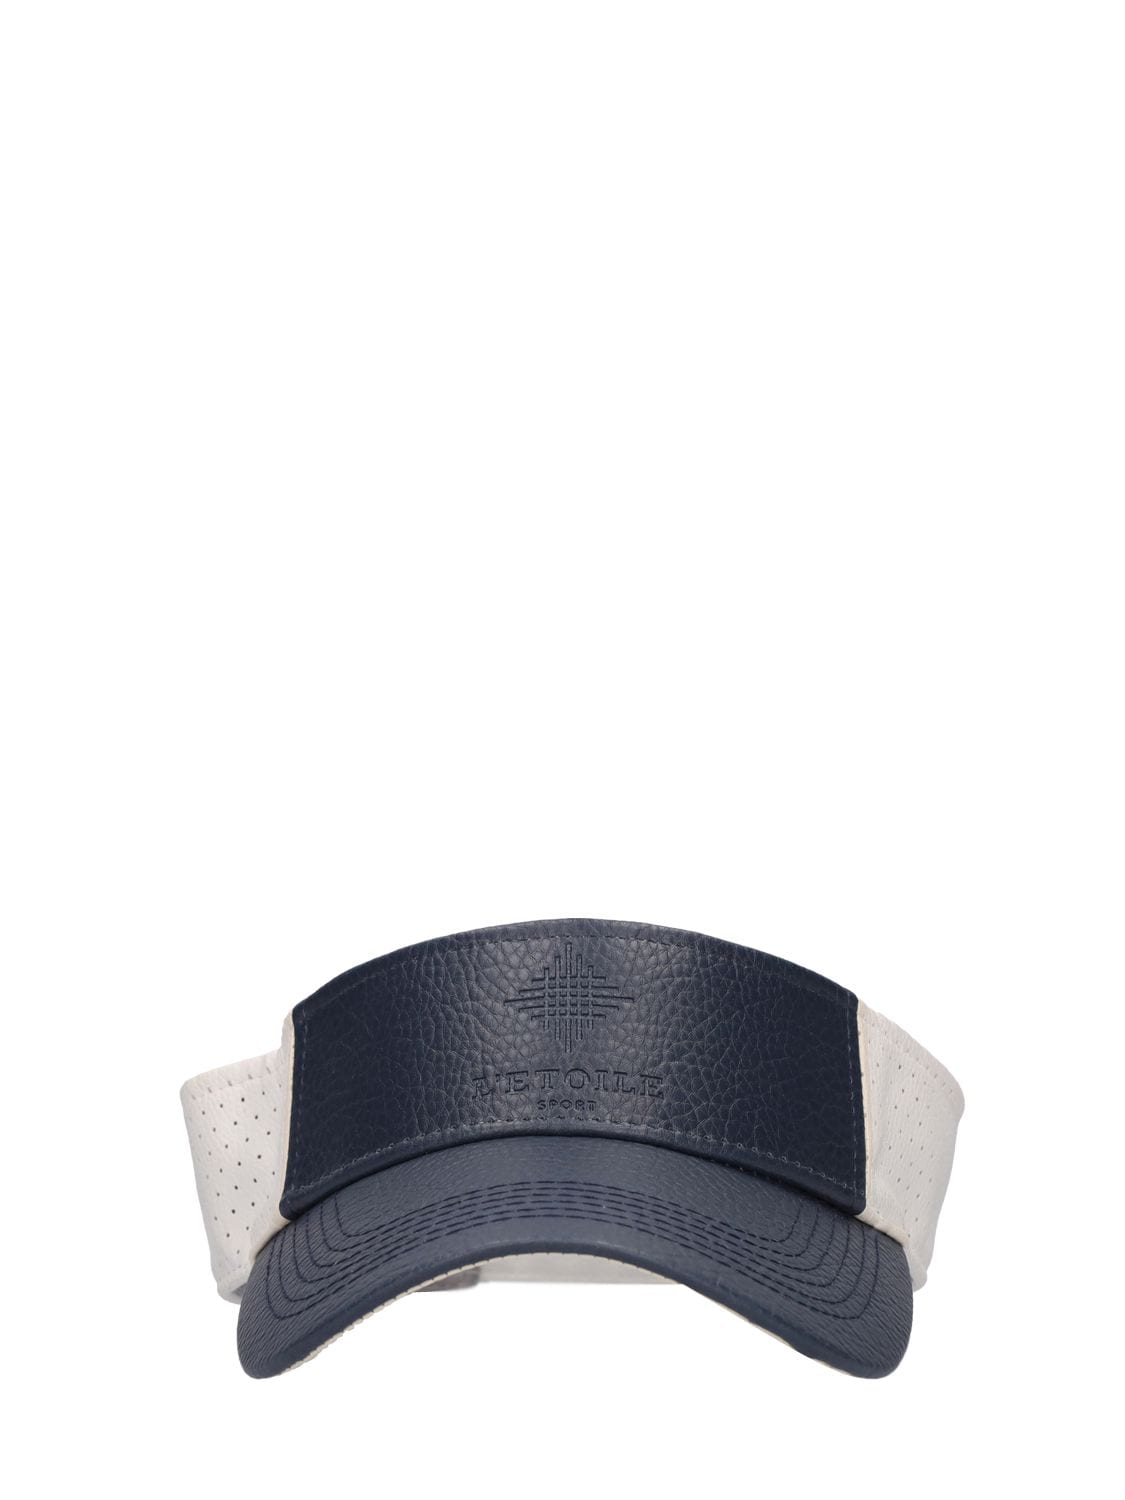 L'etoile Sport Perforated Leather Visor In Blue